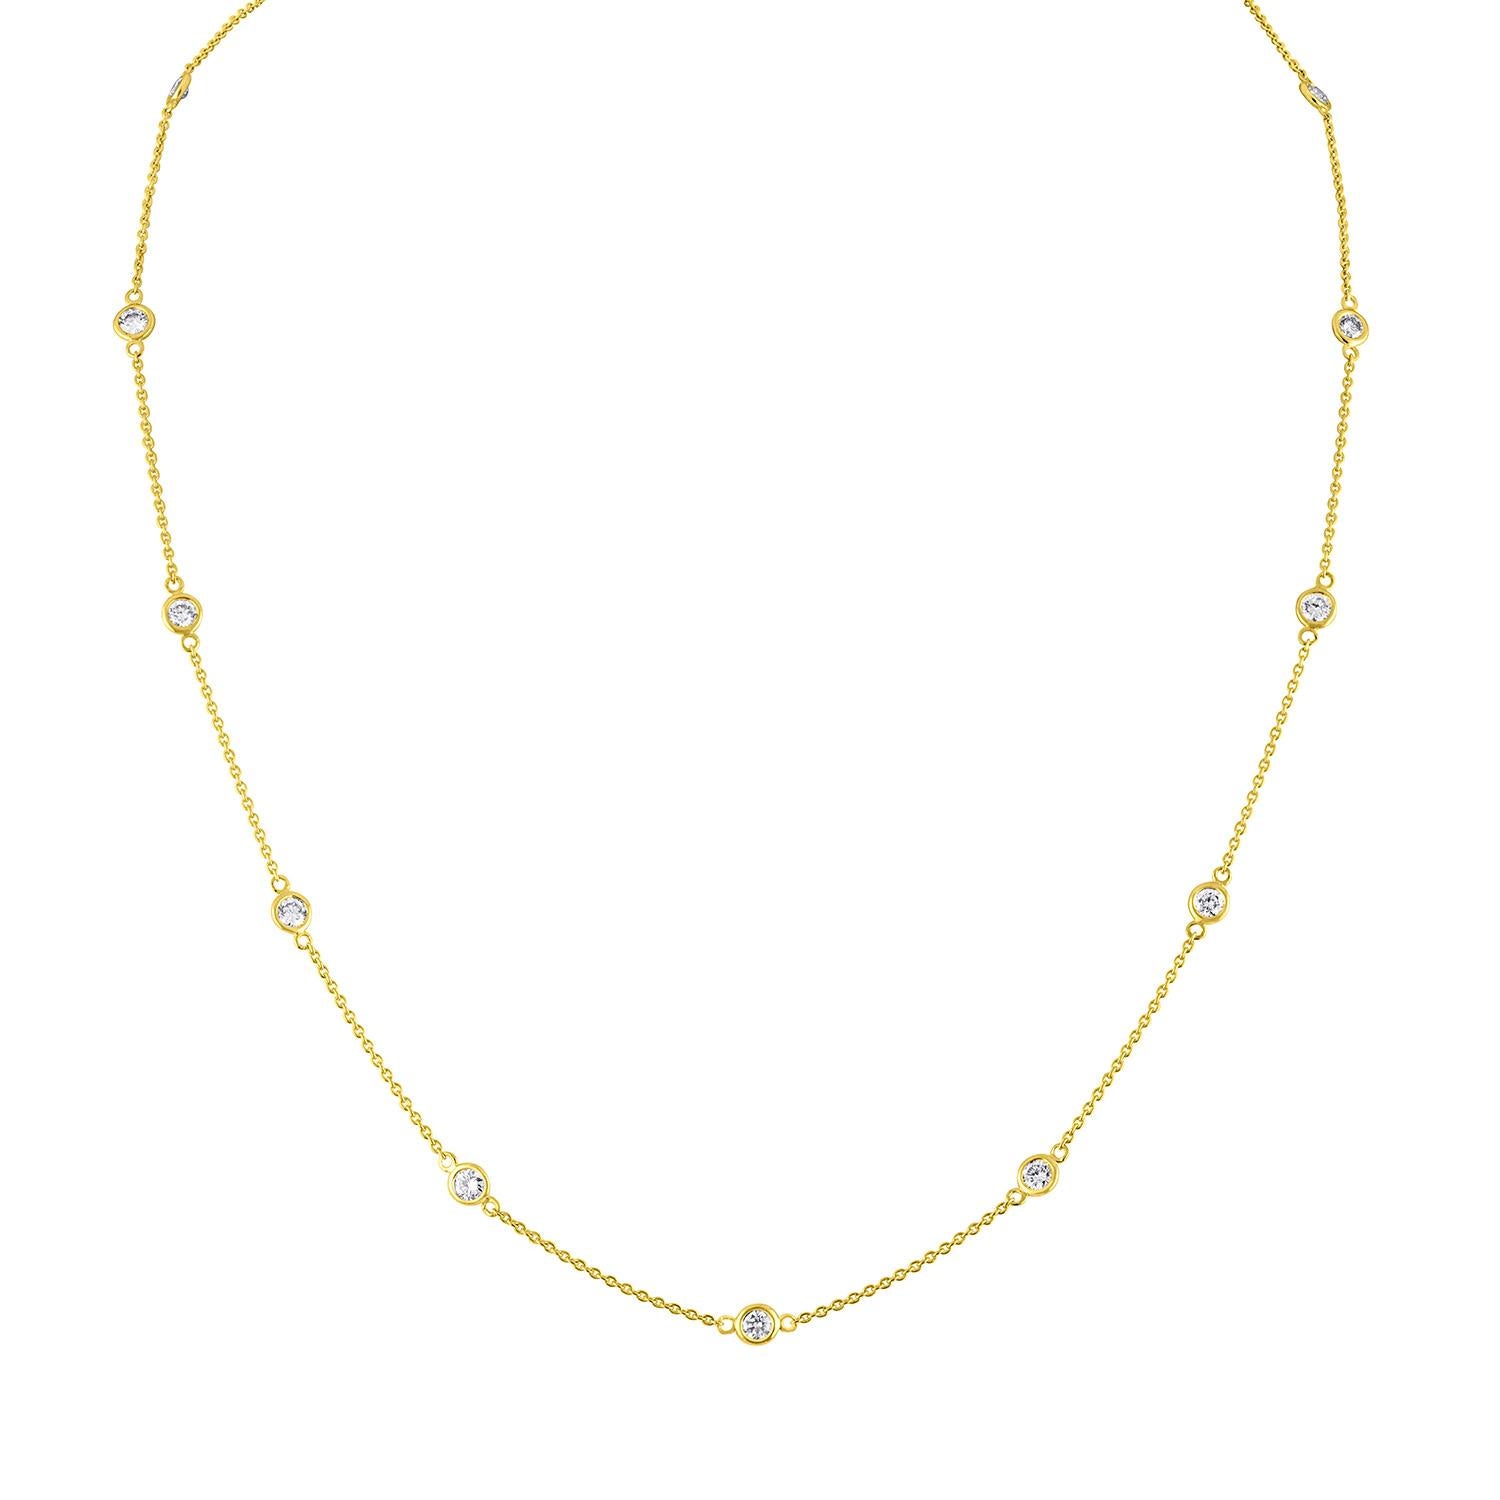 Sparkling 1ct bezel set, round cut natural diamonds are evenly spaced along a rolo chain in this delicate station necklace. A classic and elegant 14k yellow gold design that will elevate any attire. Product features:
Diamond Type: Natural White